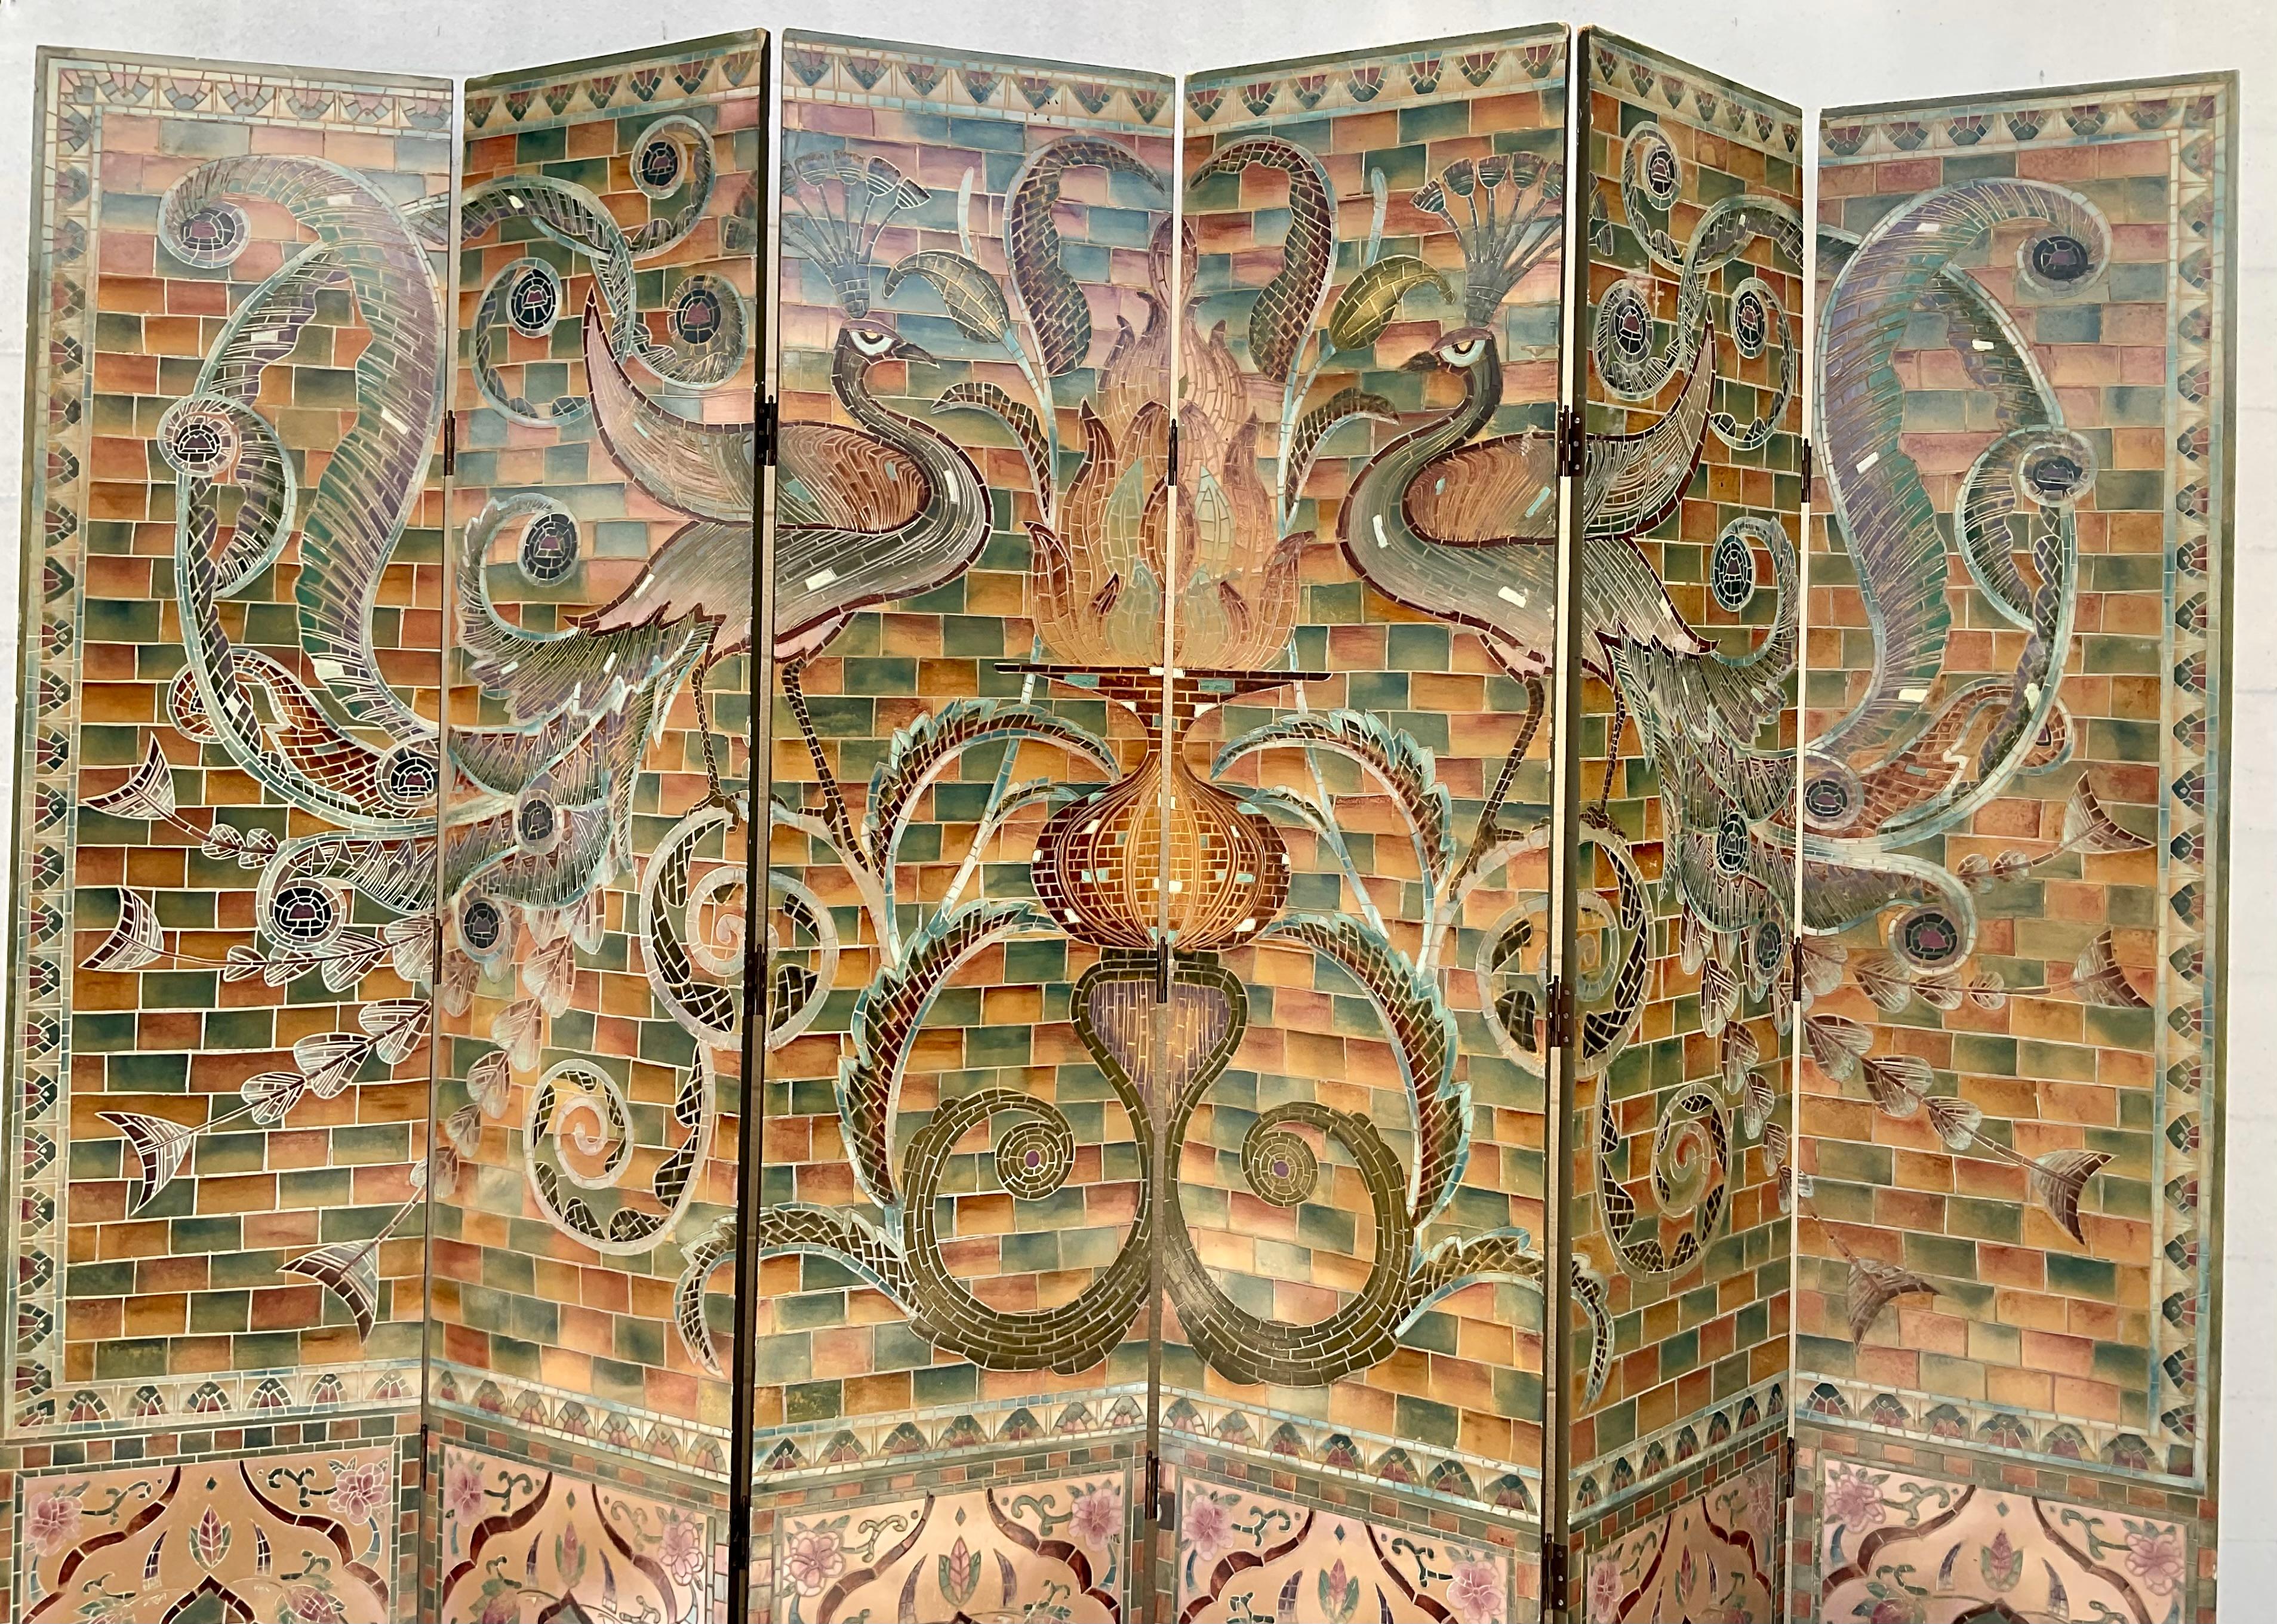 Stunning six panel screen/room divider. Screen is designed to replicate tiles of the art deco era, painted in  rich colors including sage green, rust, burgundy, and pink. Two splendid peacocks in like colors adorn each side of the front of screen.